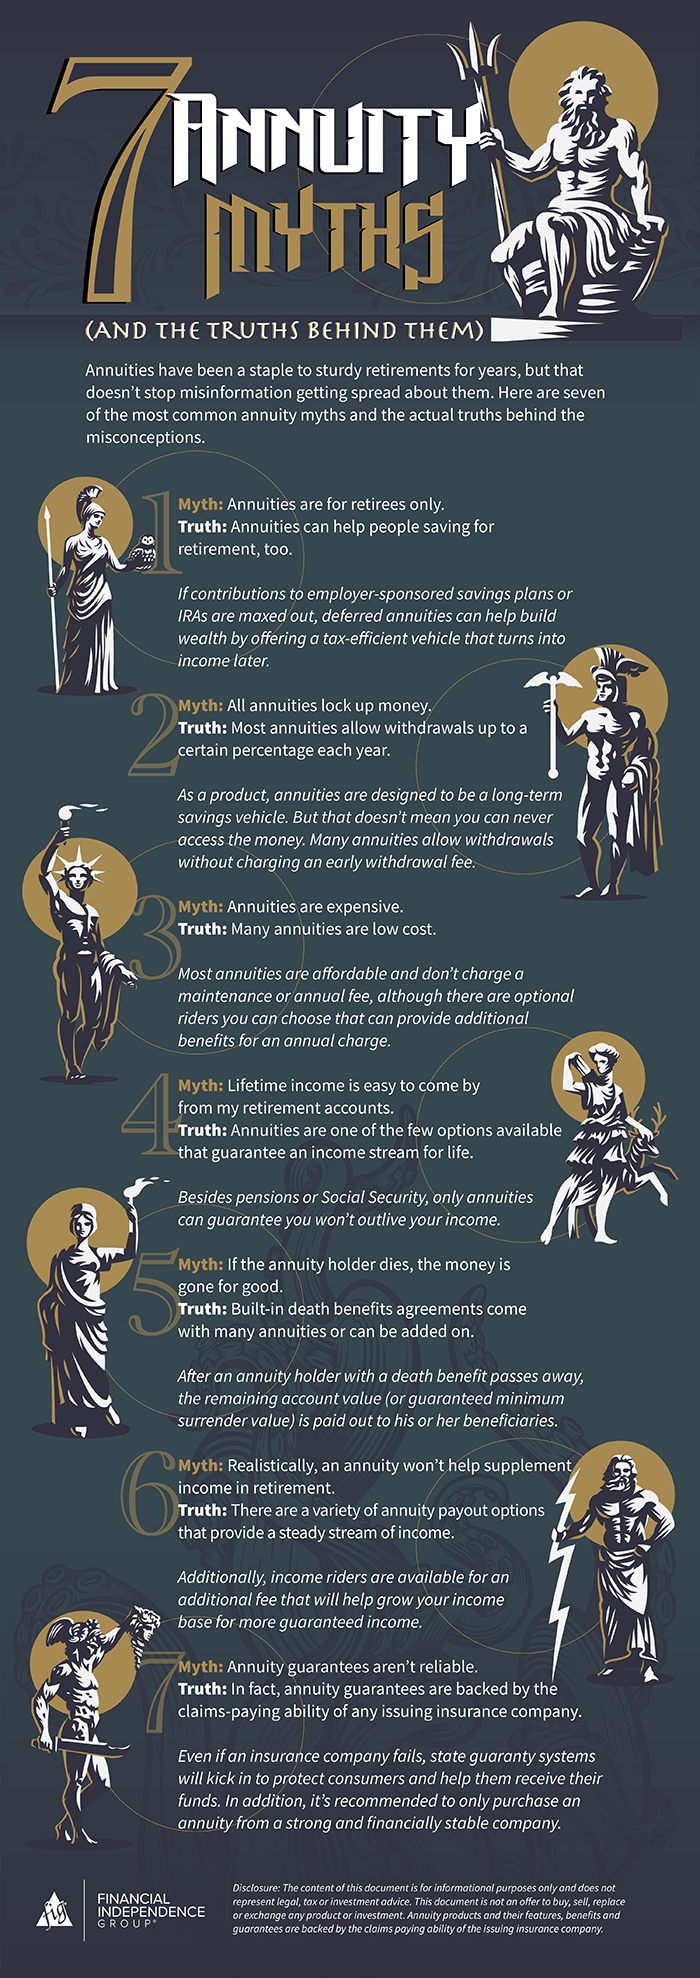 7 annuity myths and the truths behind them infographic financial independence group